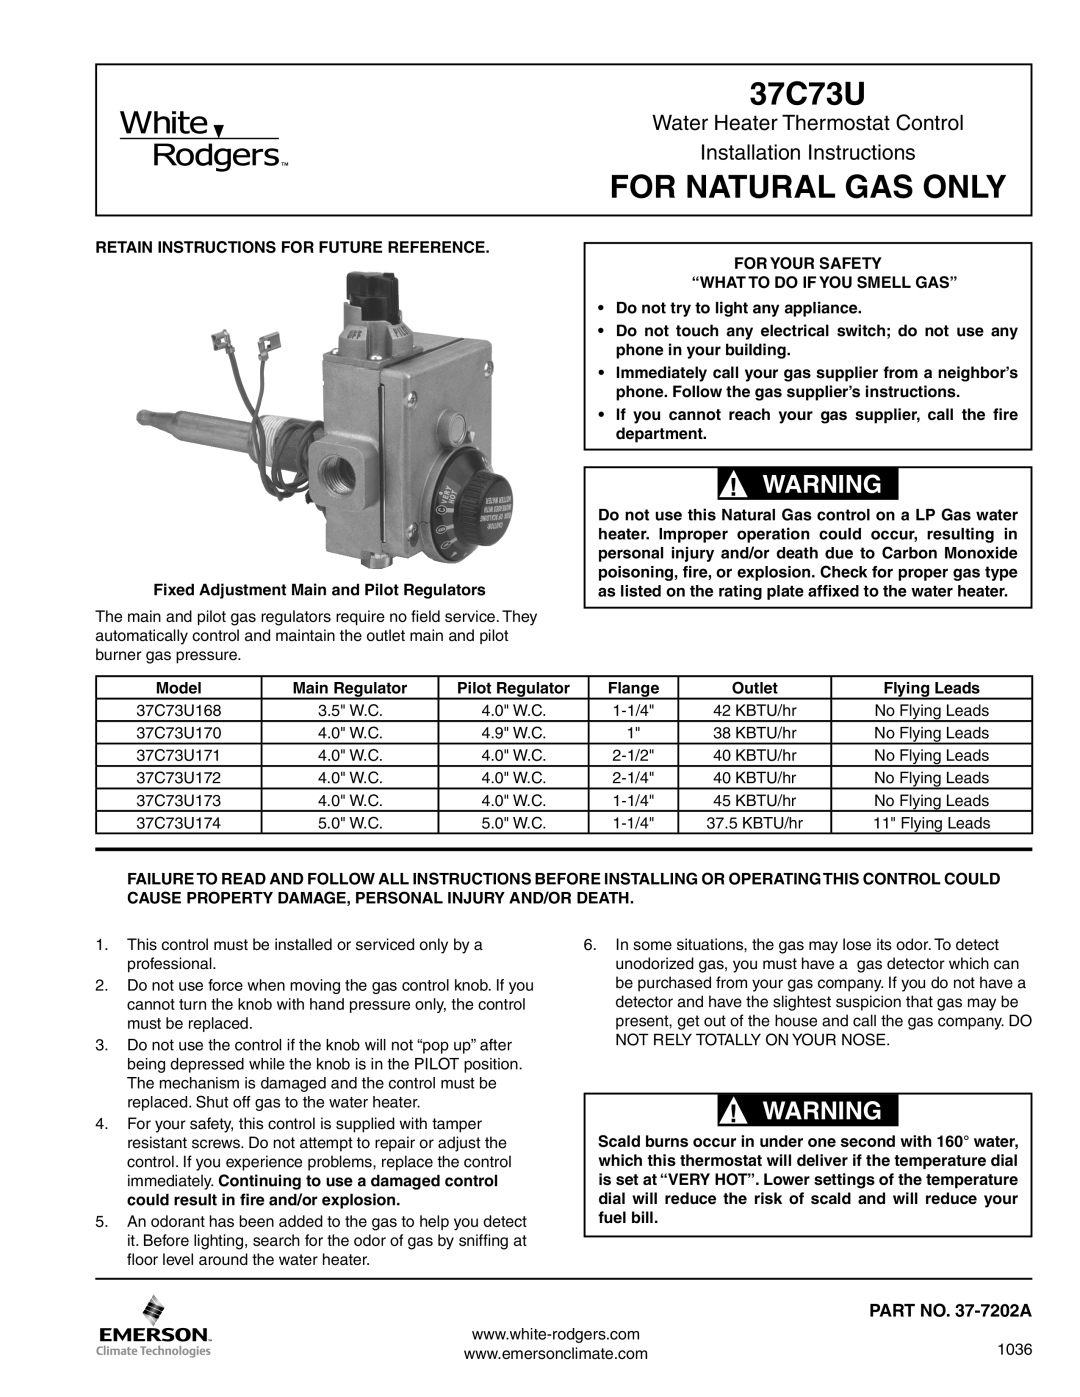 White Rodgers 37C73U installation instructions White-Rodgers, For Natural Gas Only, Water Heater Thermostat Control 